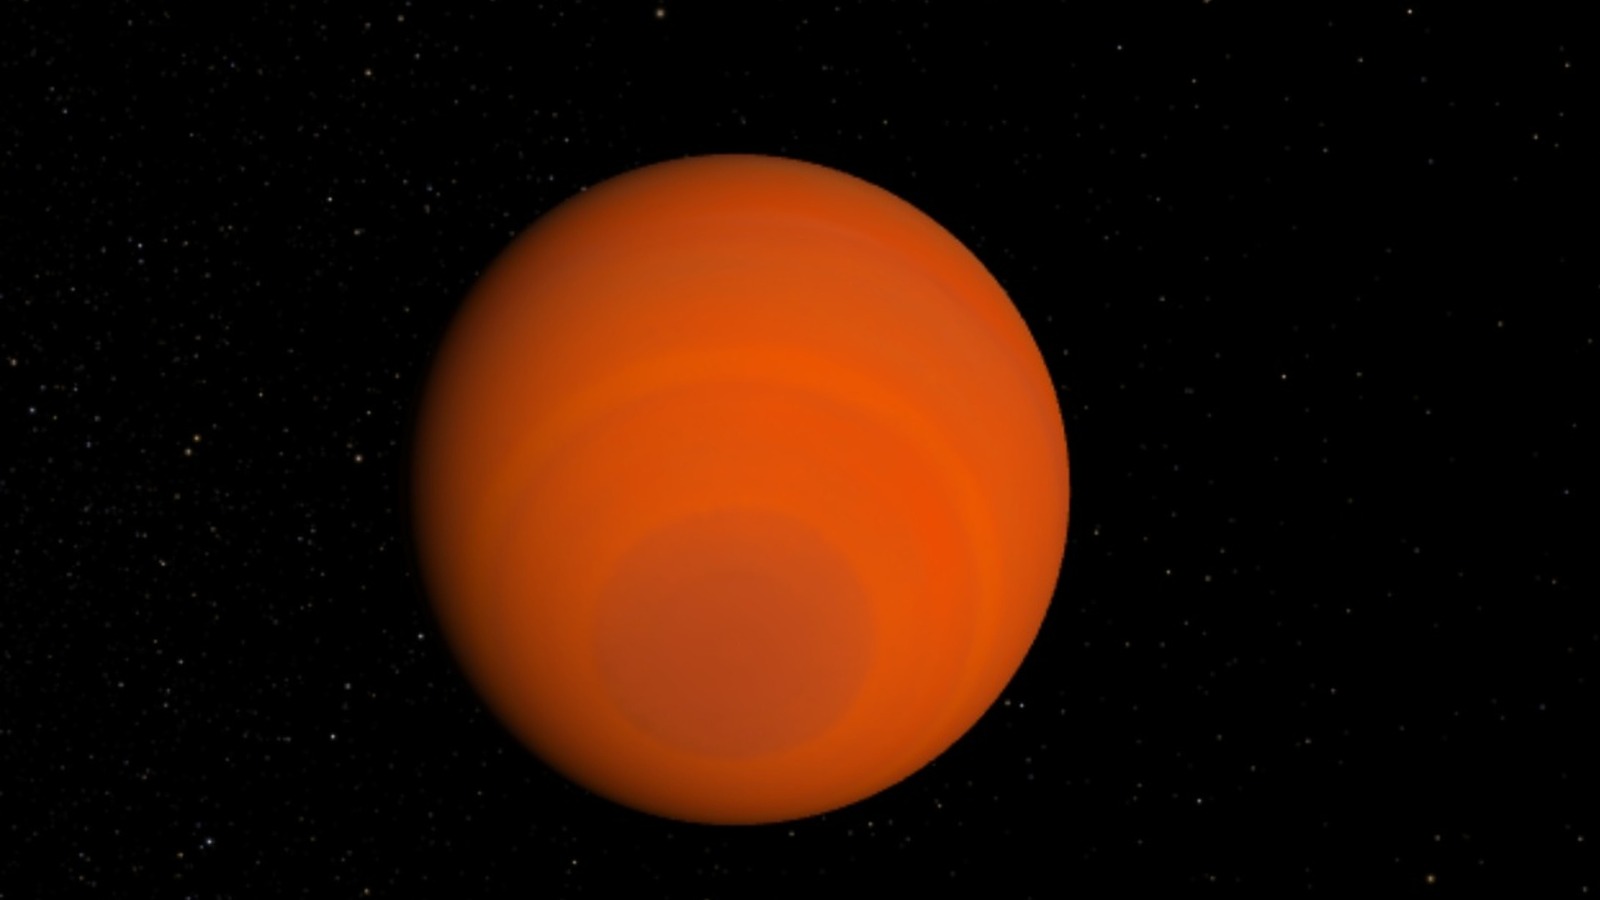 Scientists Spot A Giant Cloudy Planet That's As Light As Cotton Candy